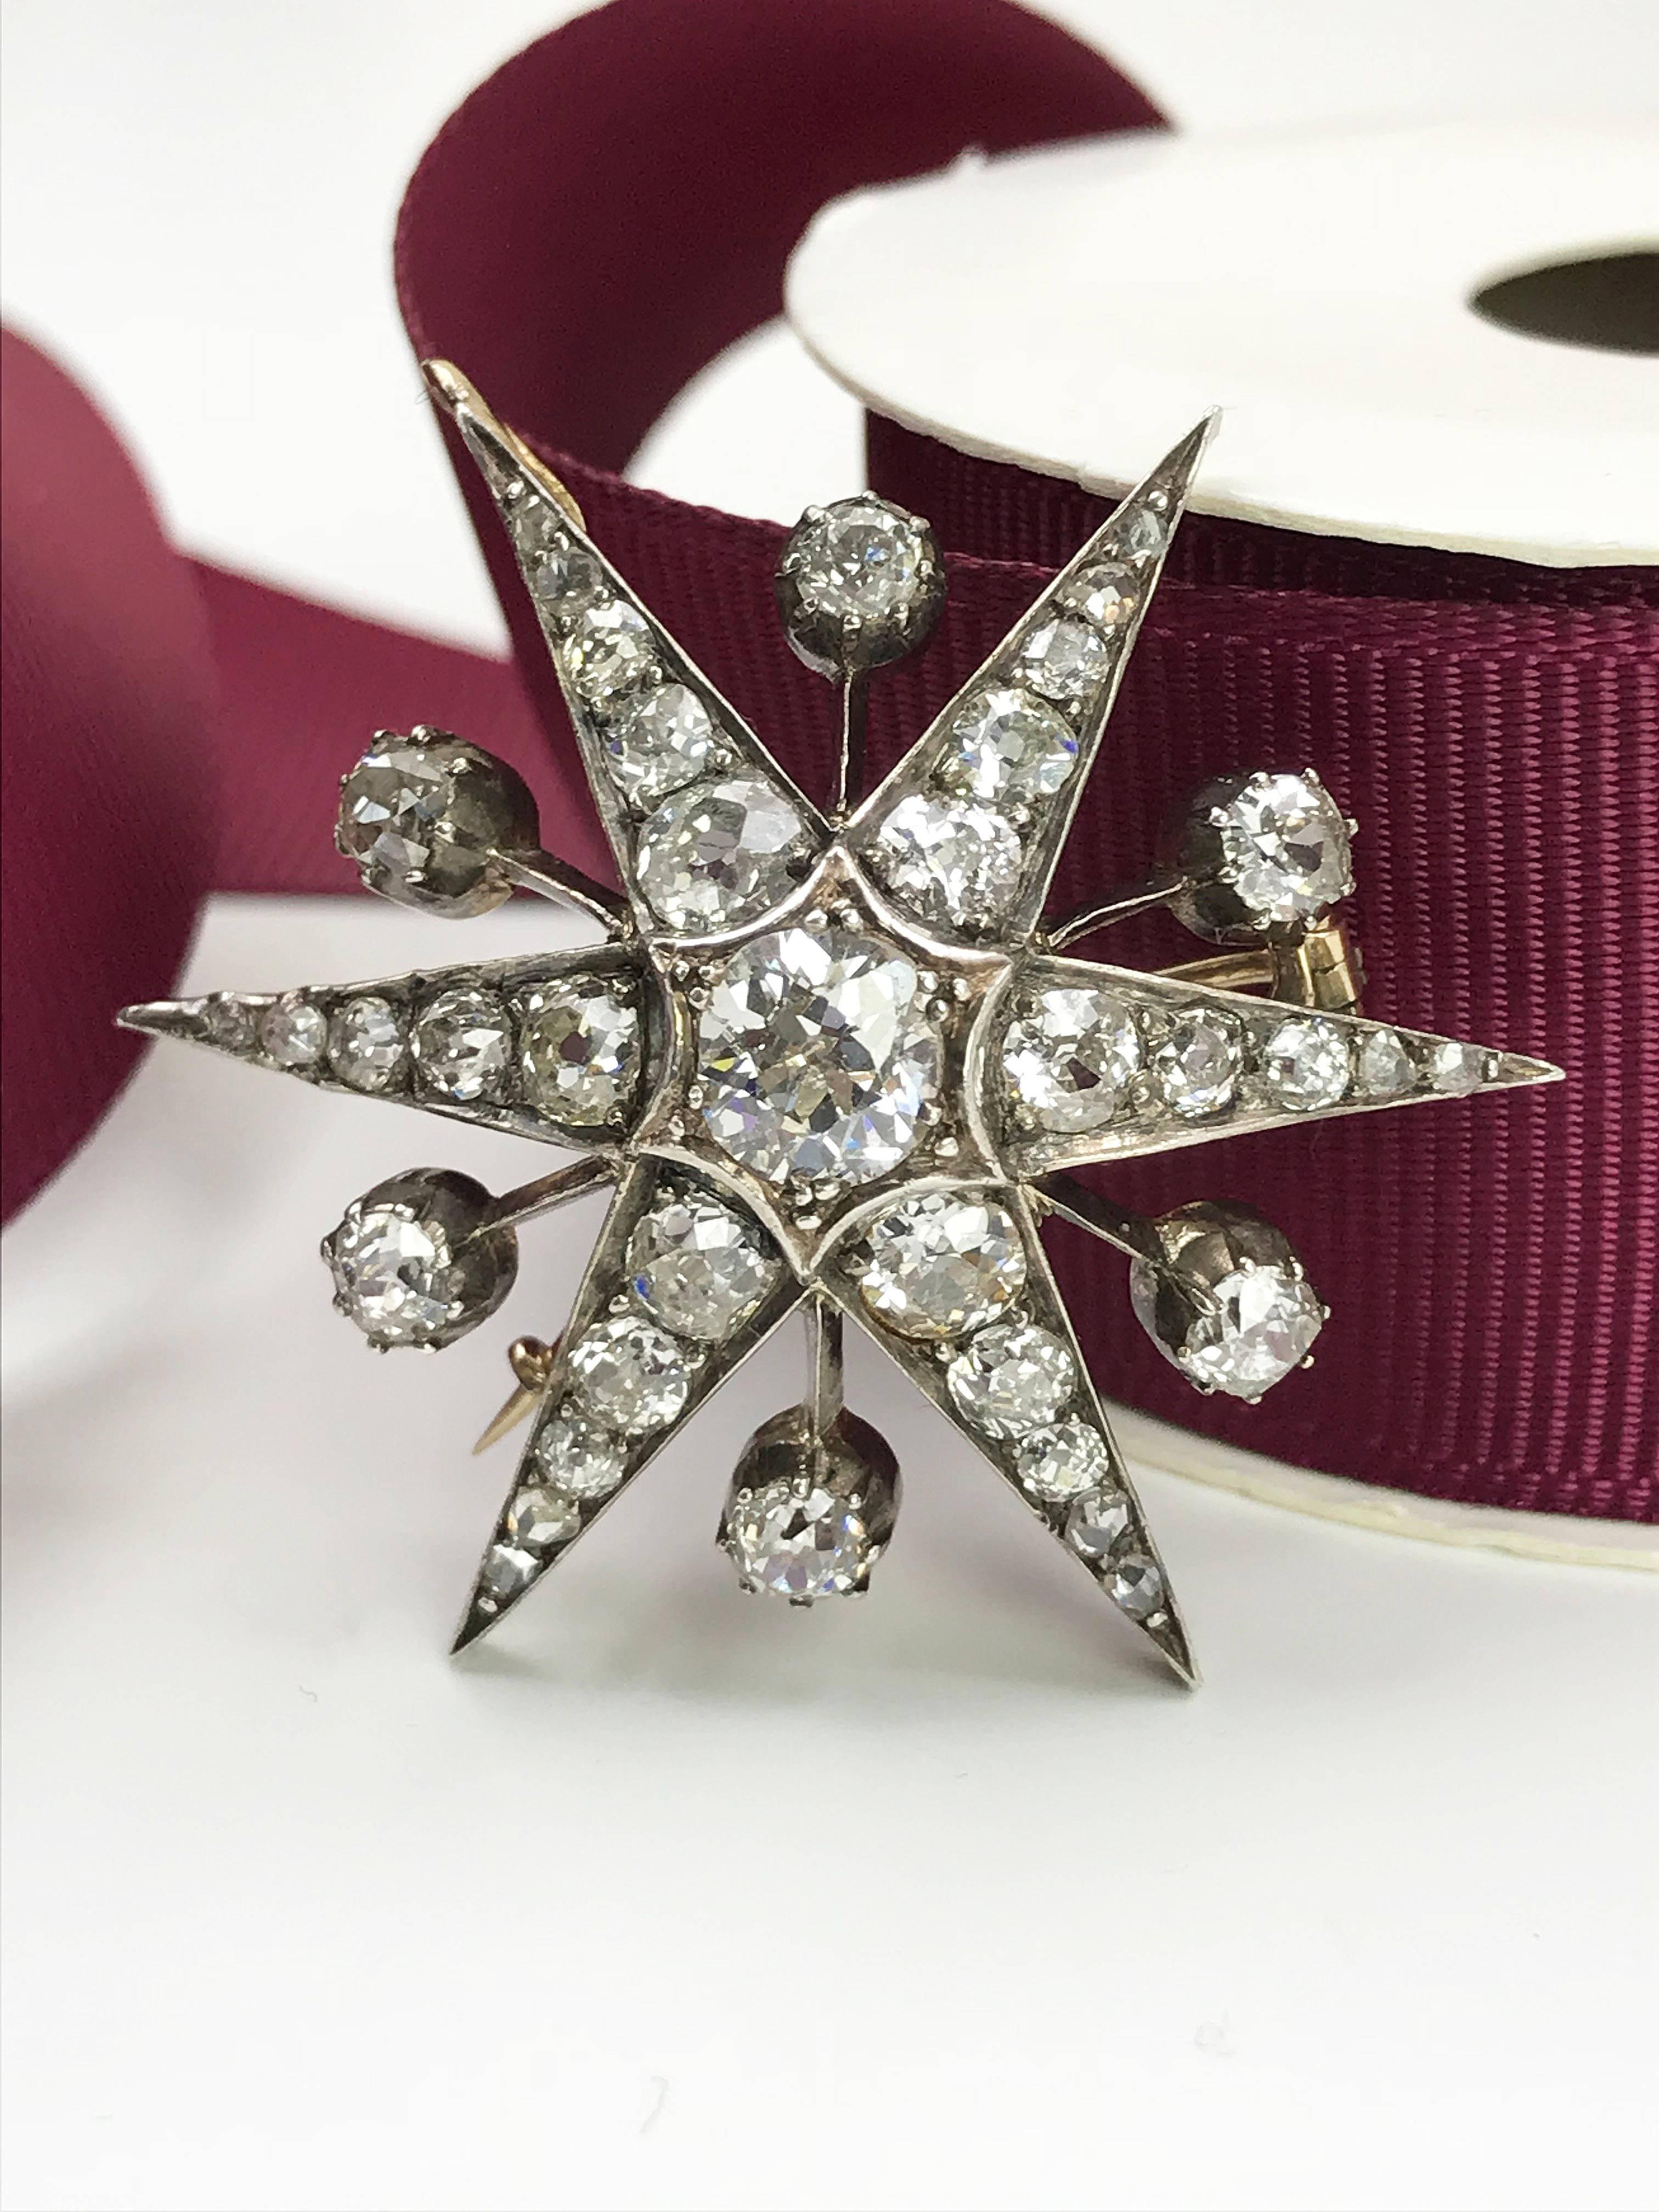 A late Victorian diamond star brooch. One of the favorite brooch style from Queen Elizabeth II. Set with 9ct gold front and silver back, old-cut diamond with vari-cut diamond rays and spacers. May be worn as a pendant. Estimated total diamond weight